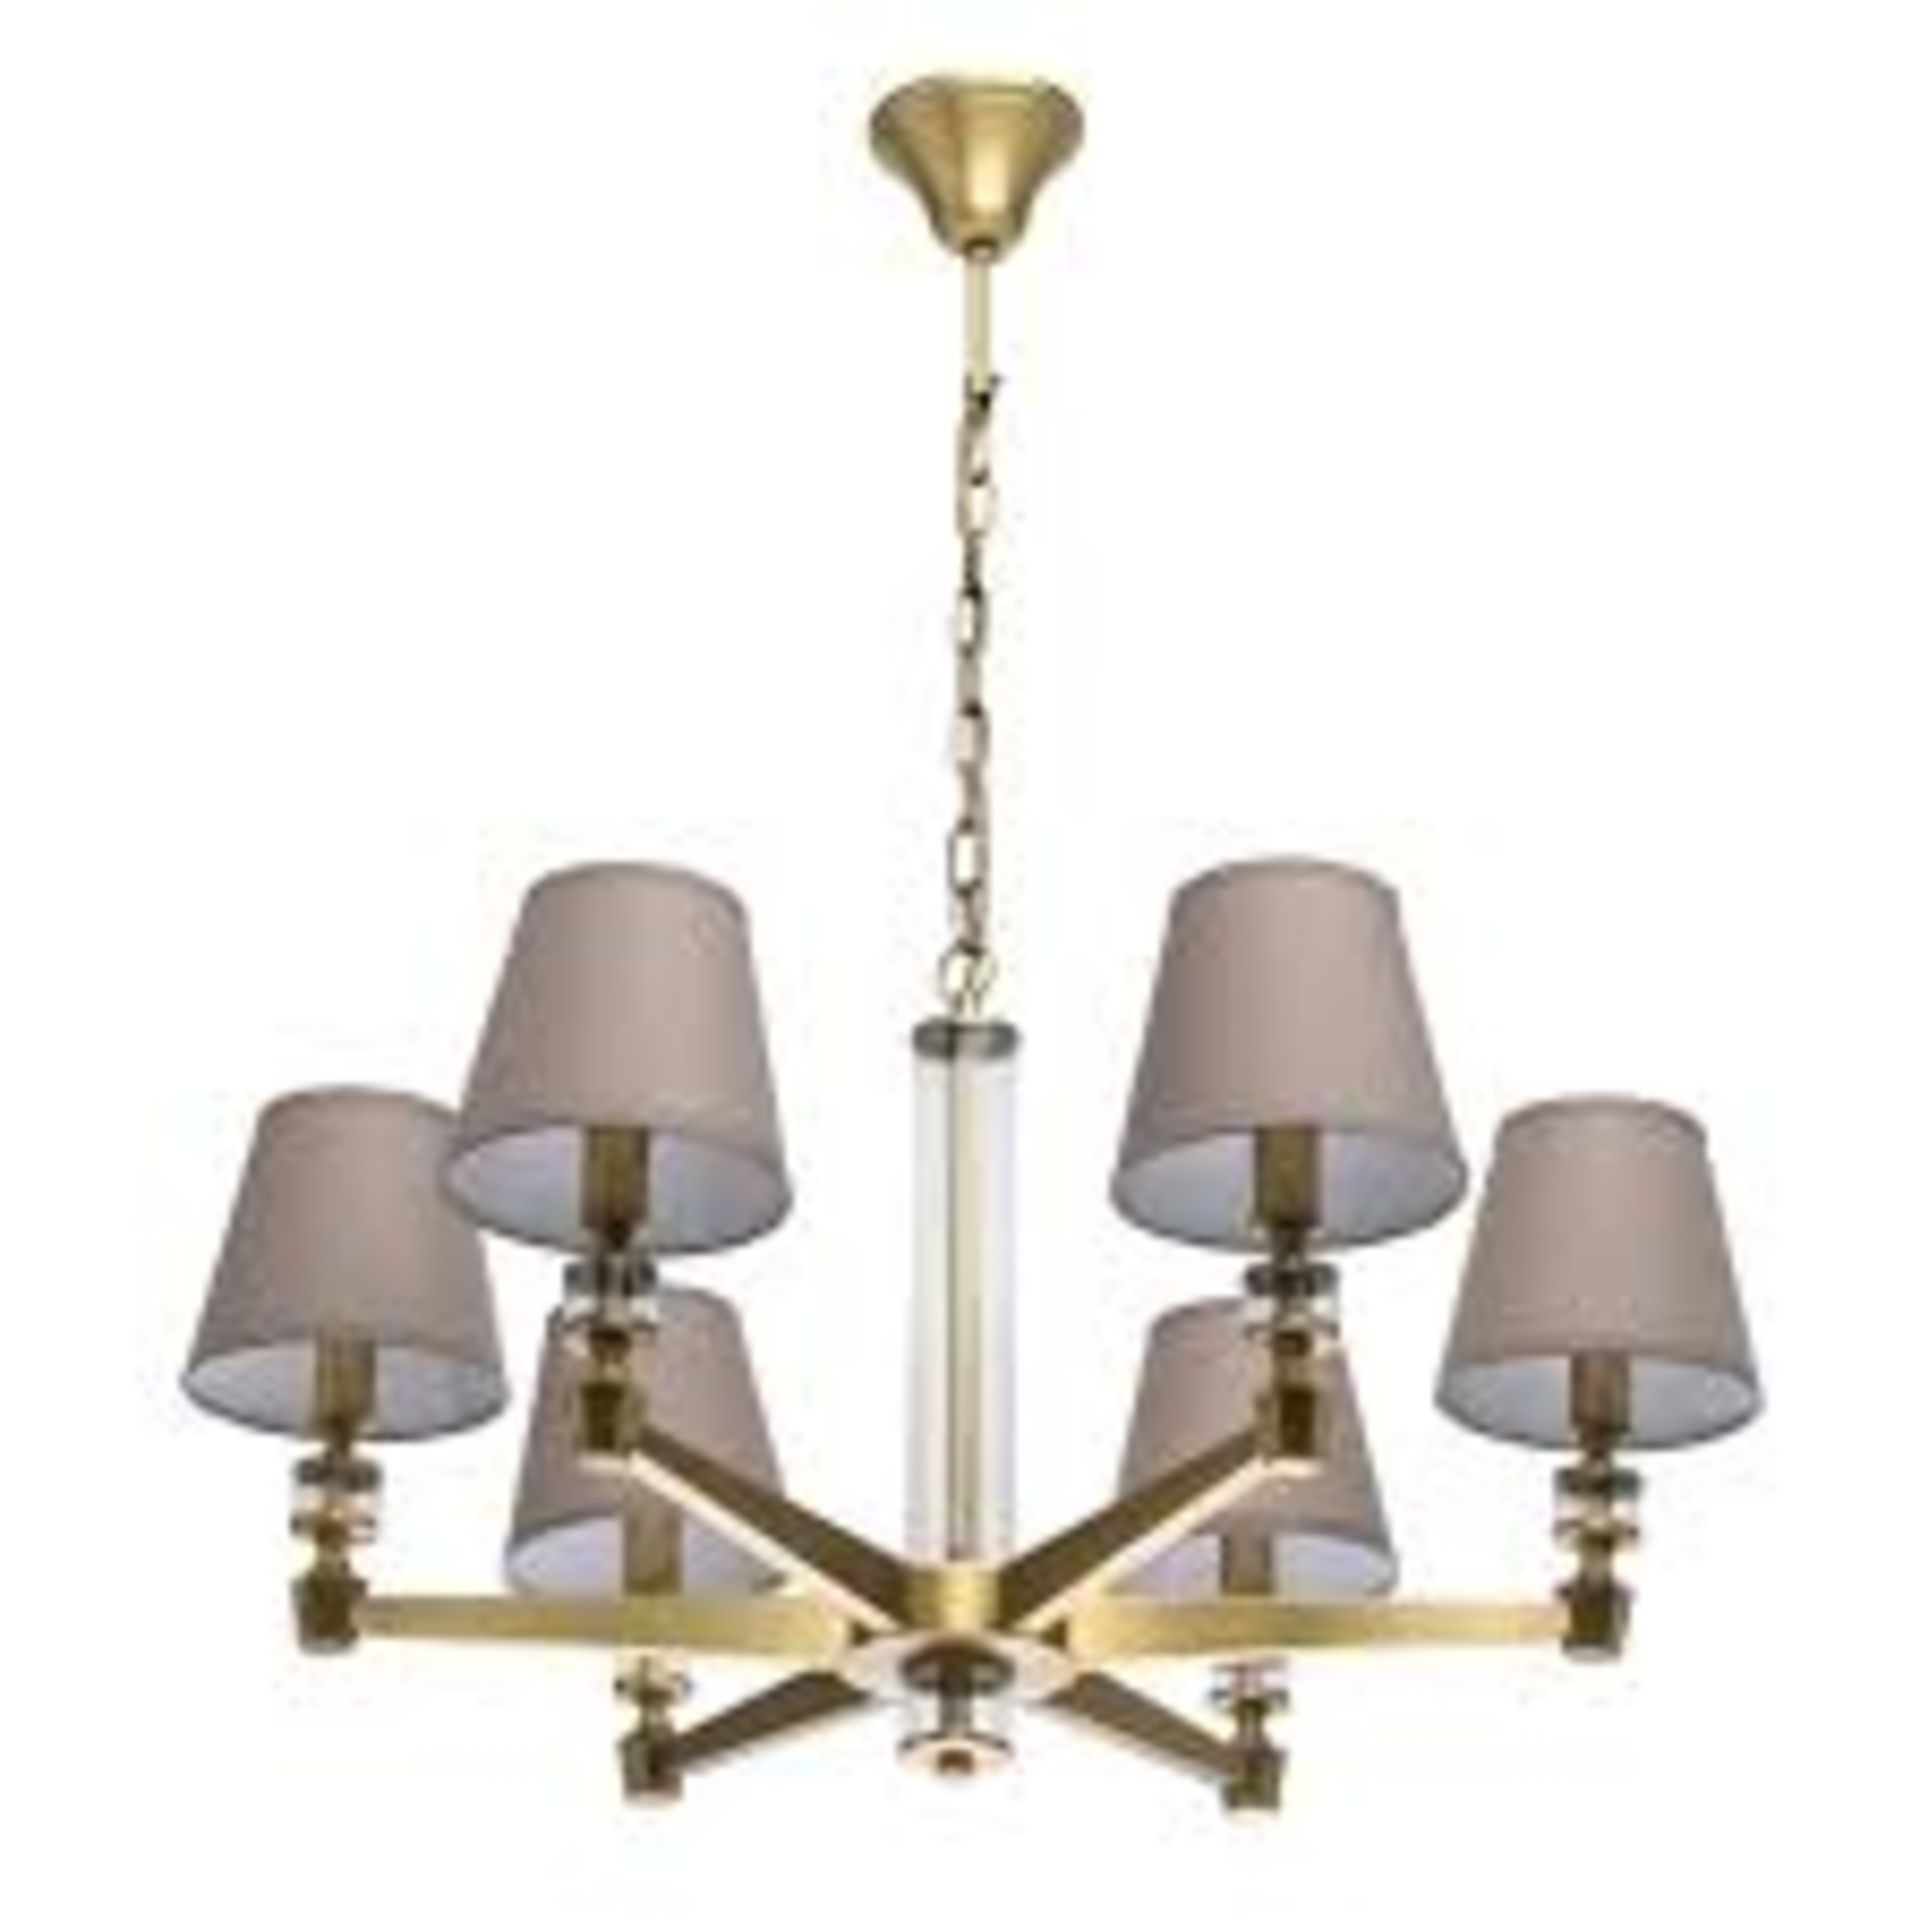 Boxed Willow Arlo Designer 6 Light Shaded Chandelier Ceiling Light RRP £280 (16543) (Pictures Are